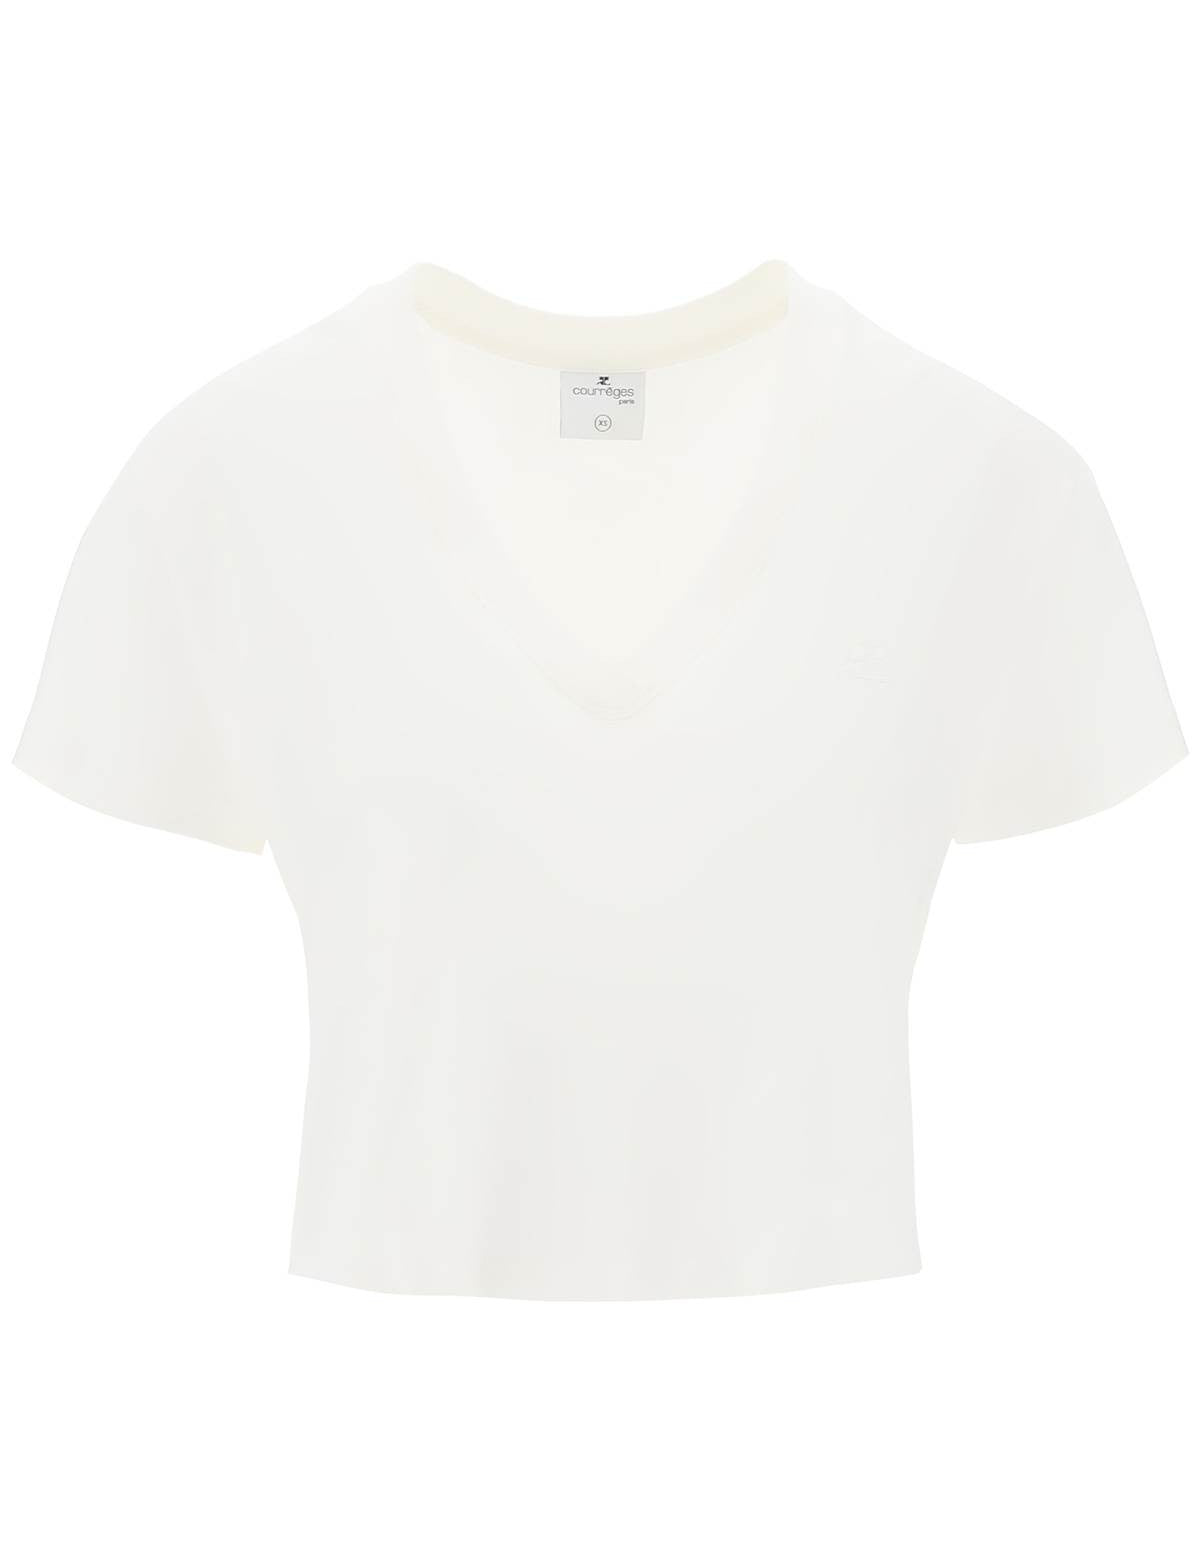 courreges-cropped-logo-t-shirt-with.jpg